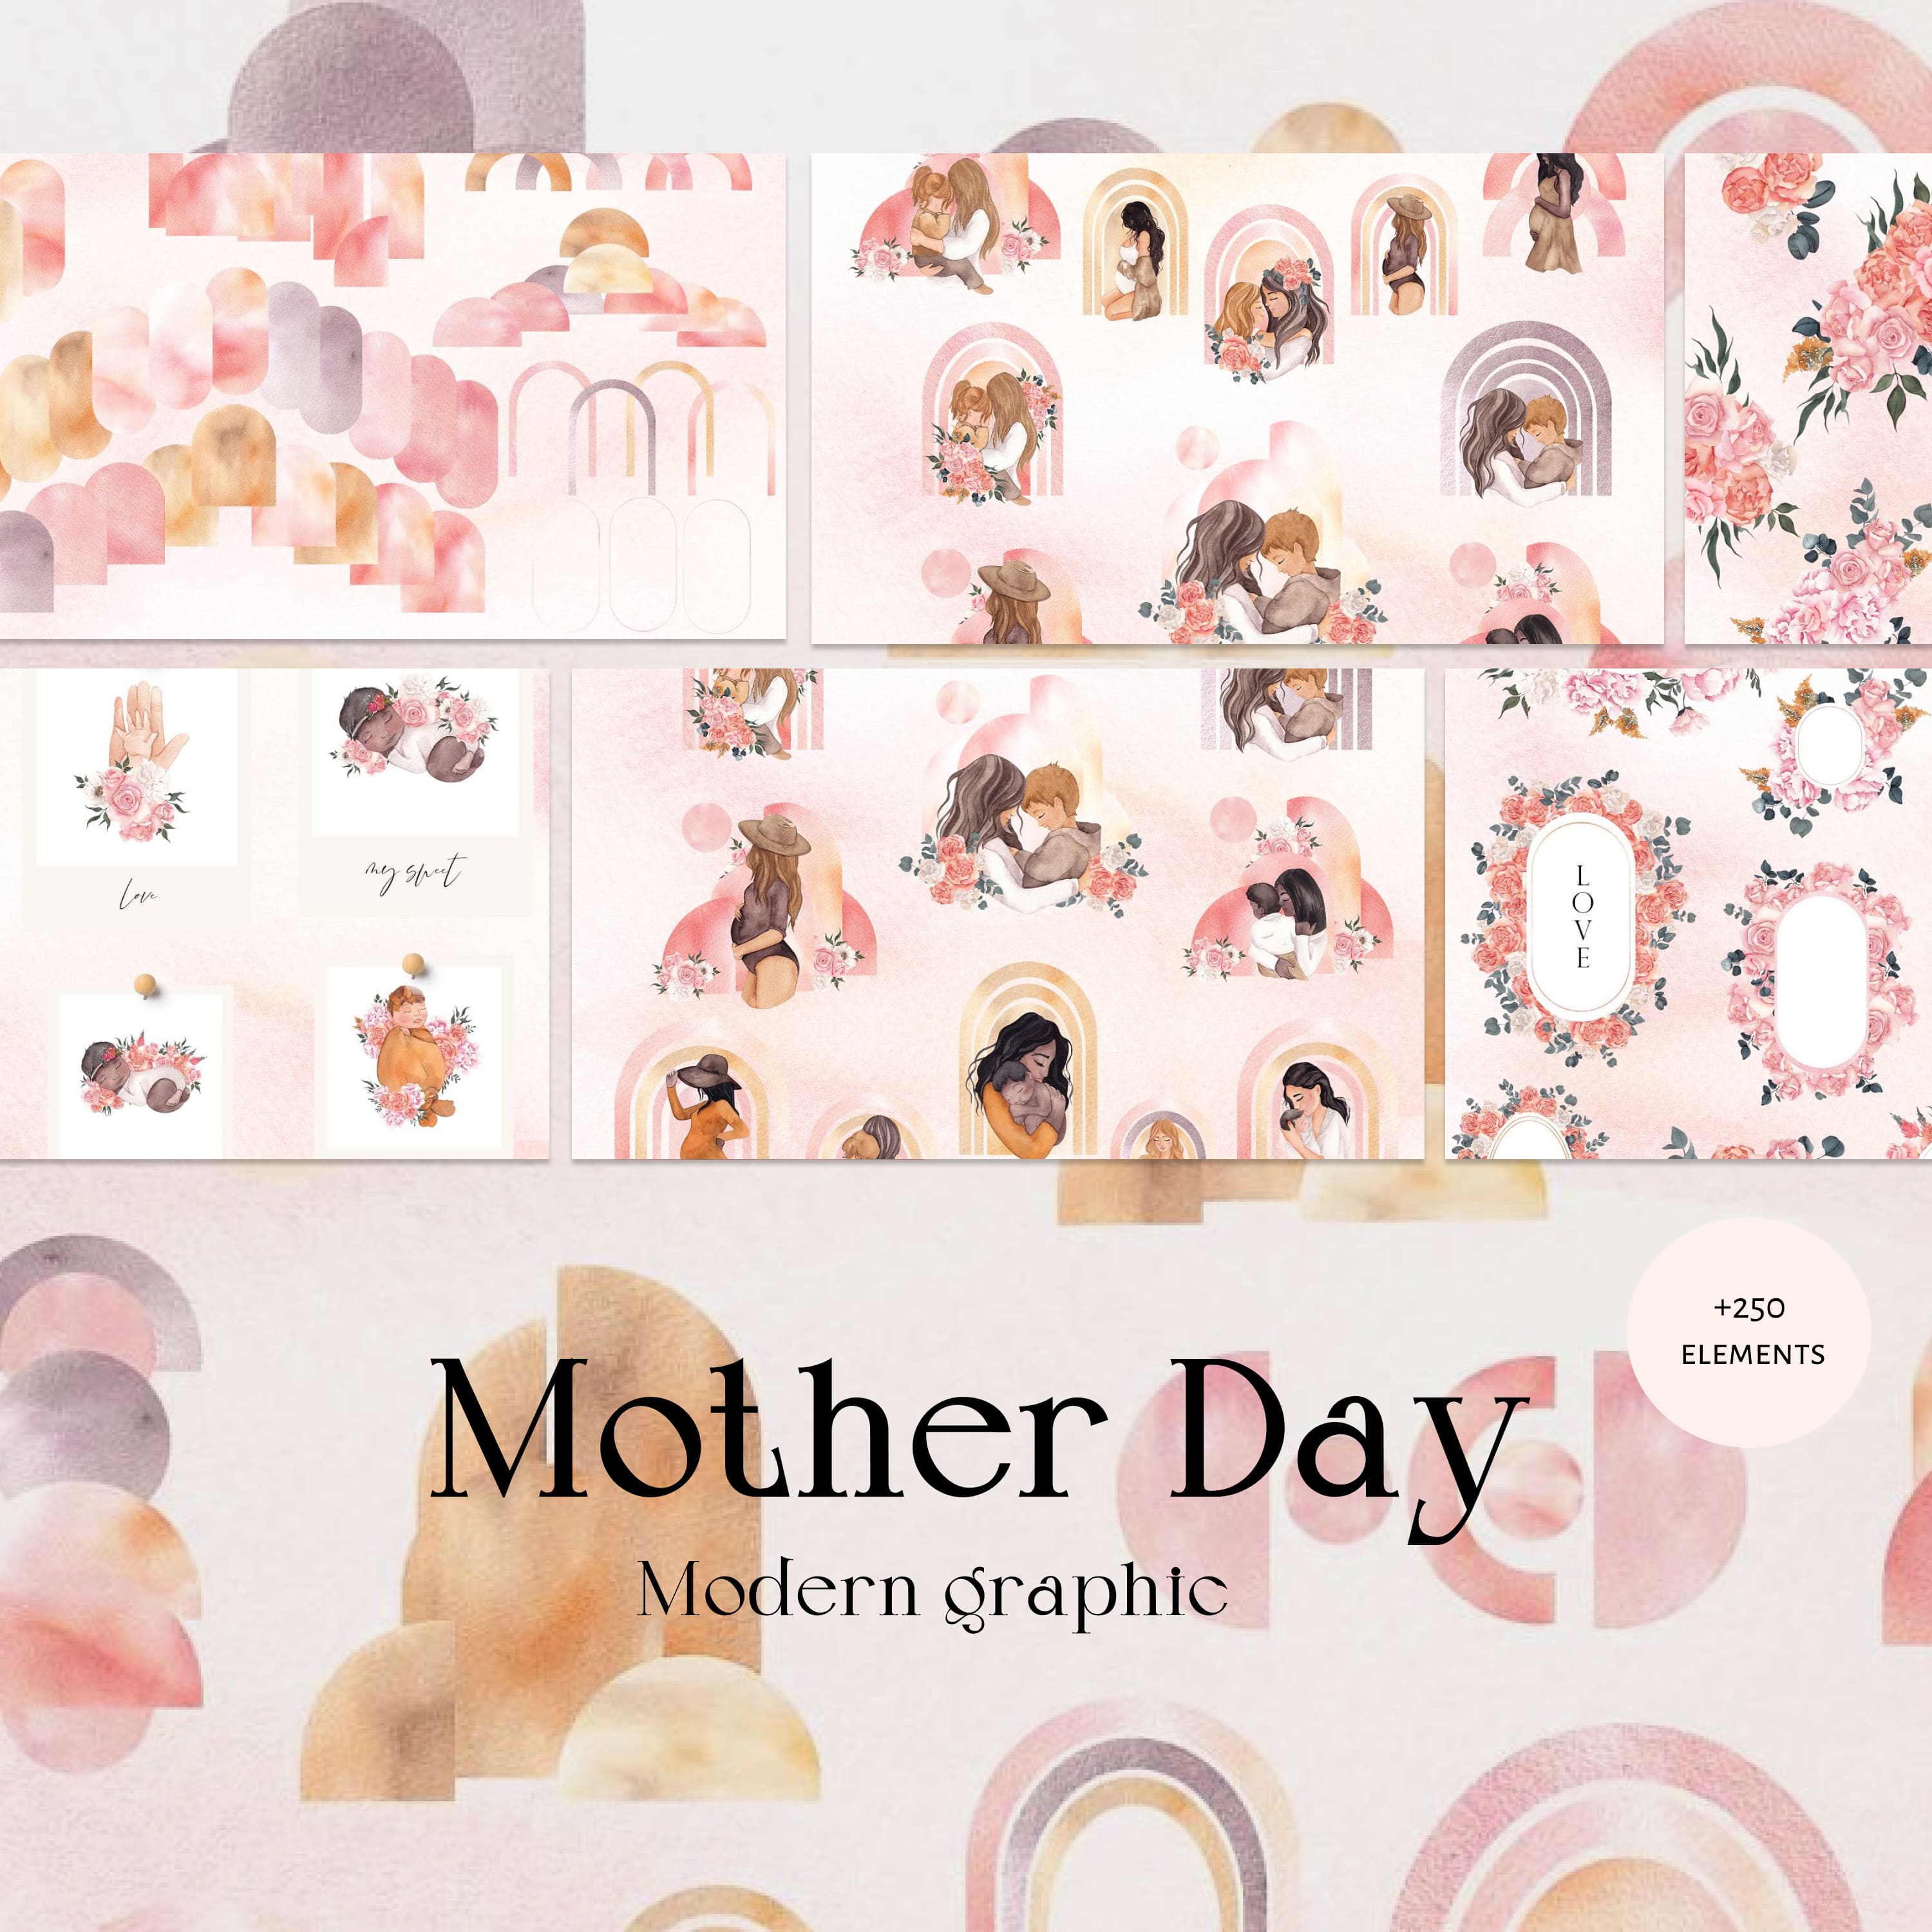 Mother Day. Modern graphic. cover.